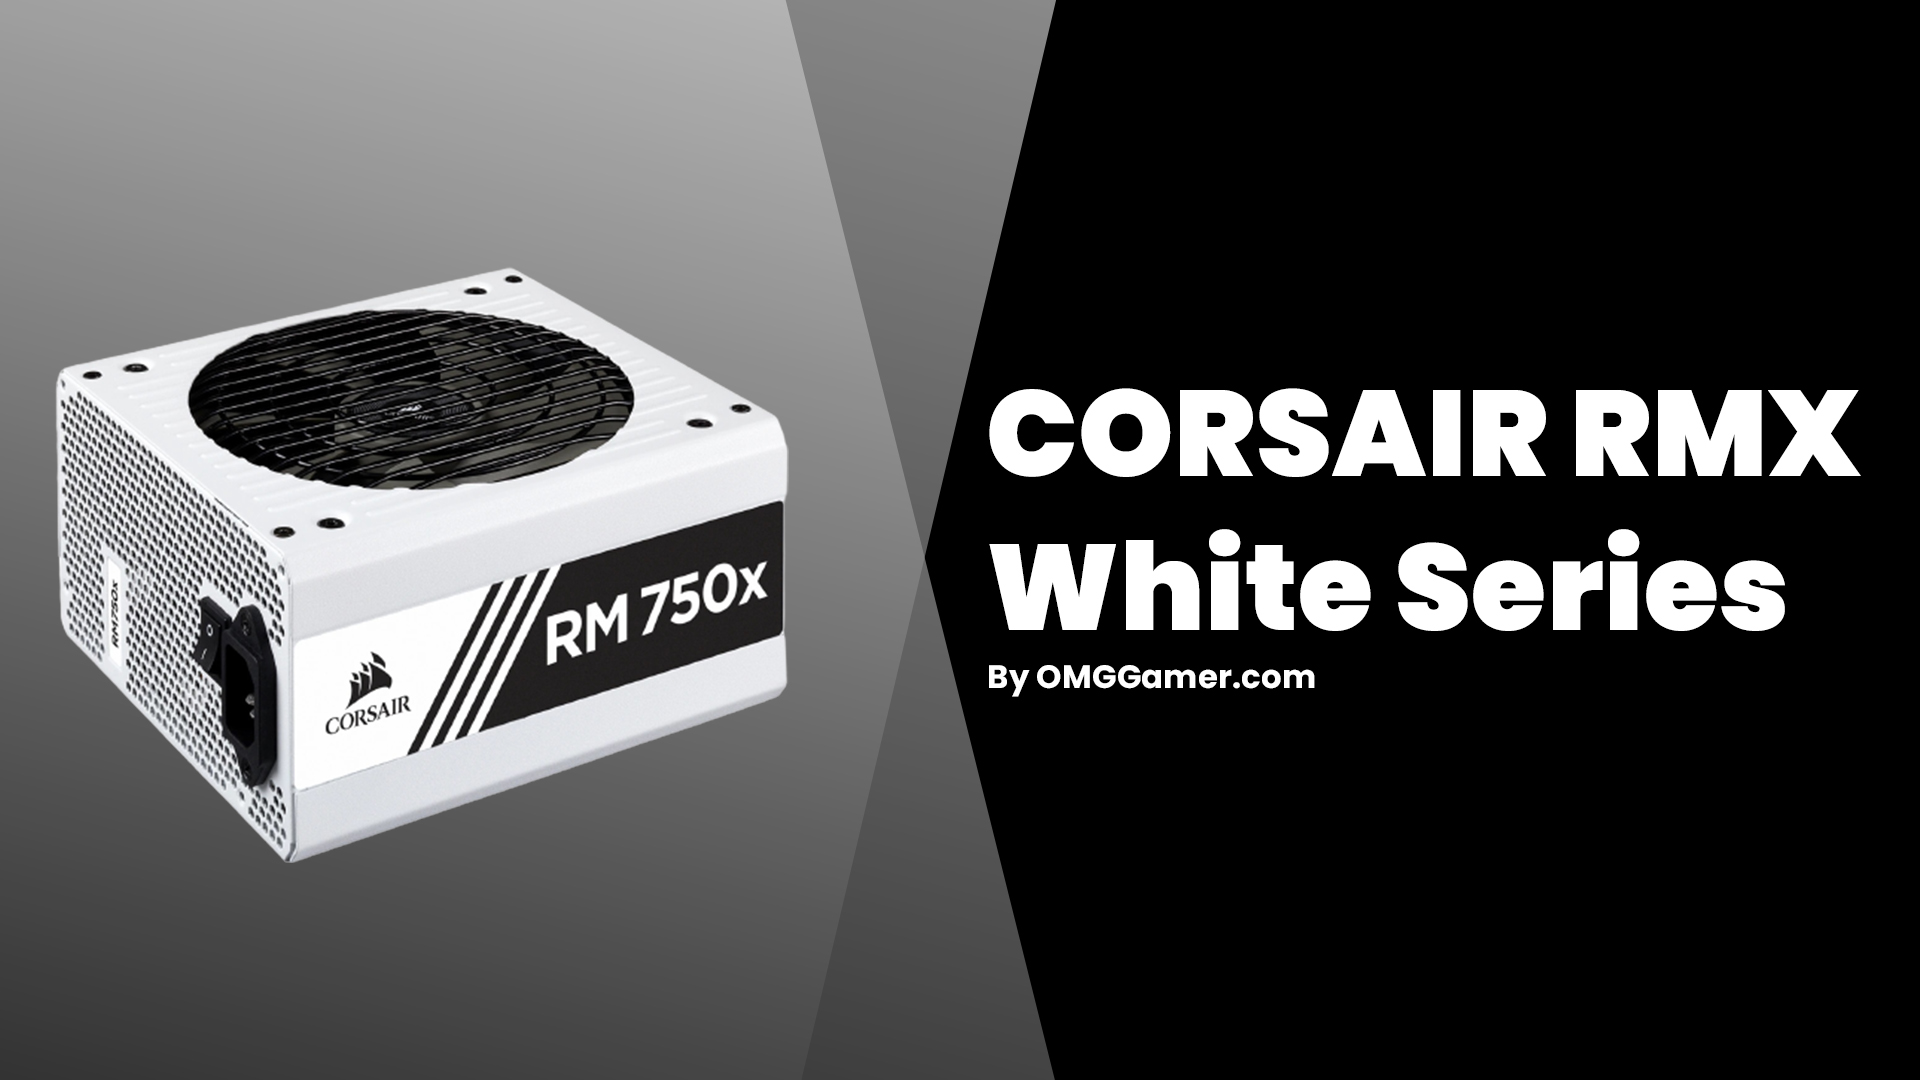 CORSAIR RMX White Series Power Supply for Gaming PC